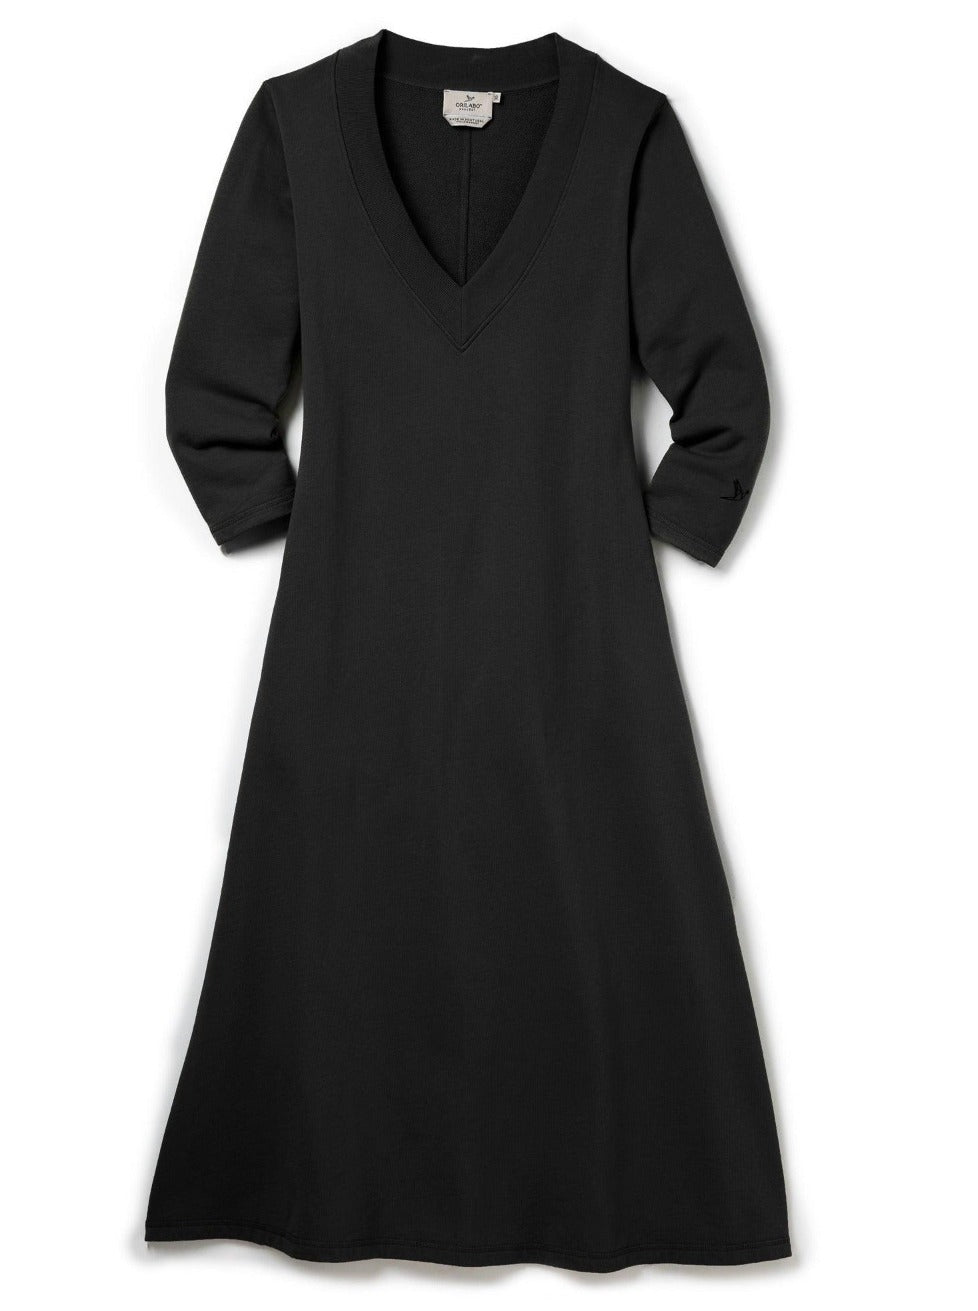 Terry Dress - Black - ORILABO Project